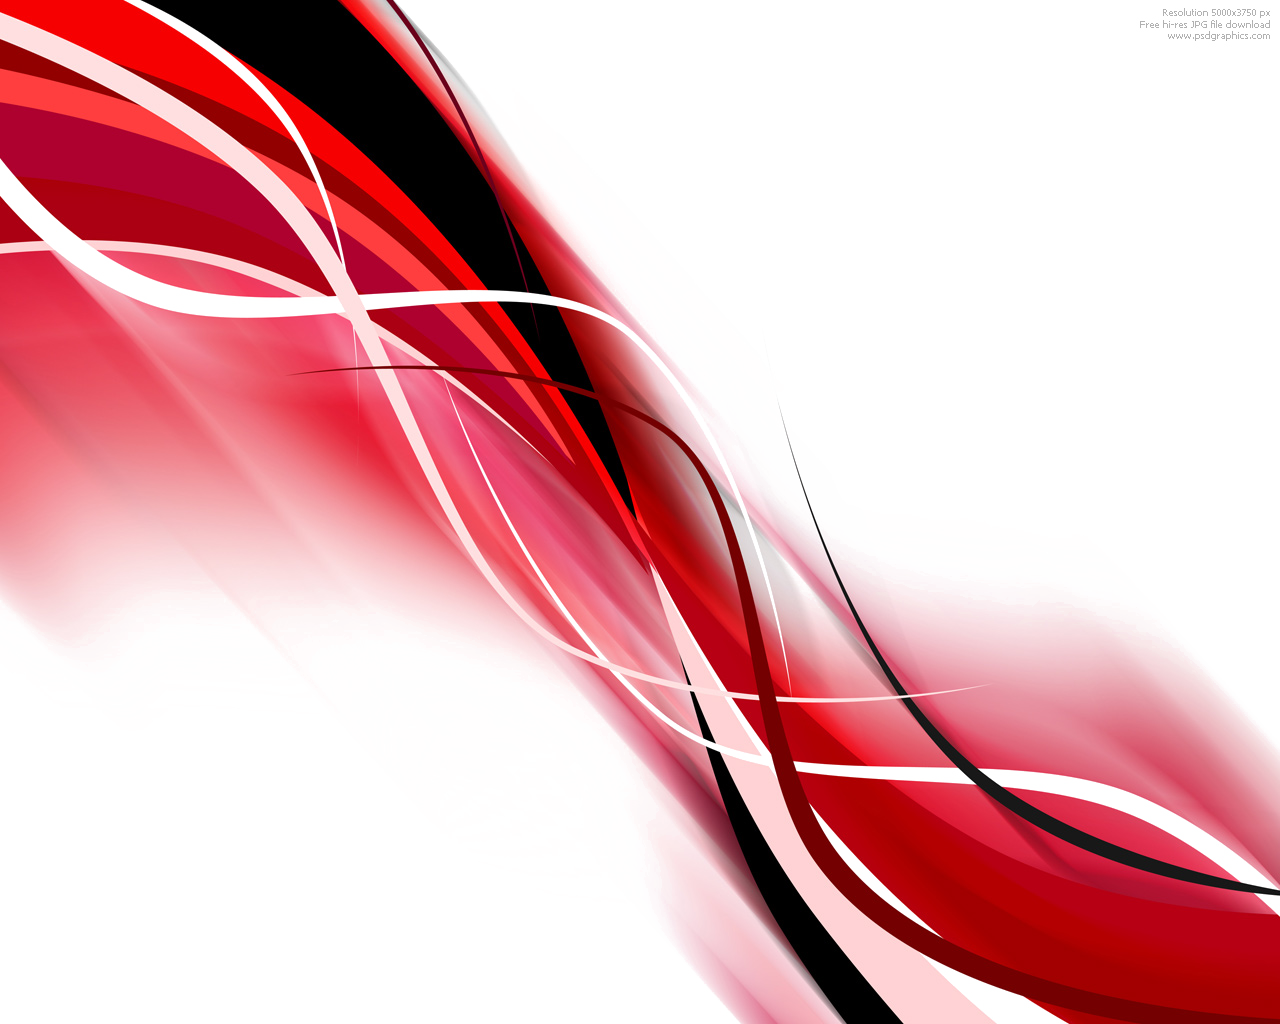 Download PNG image - Red Abstract Lines PNG Transparent Image 